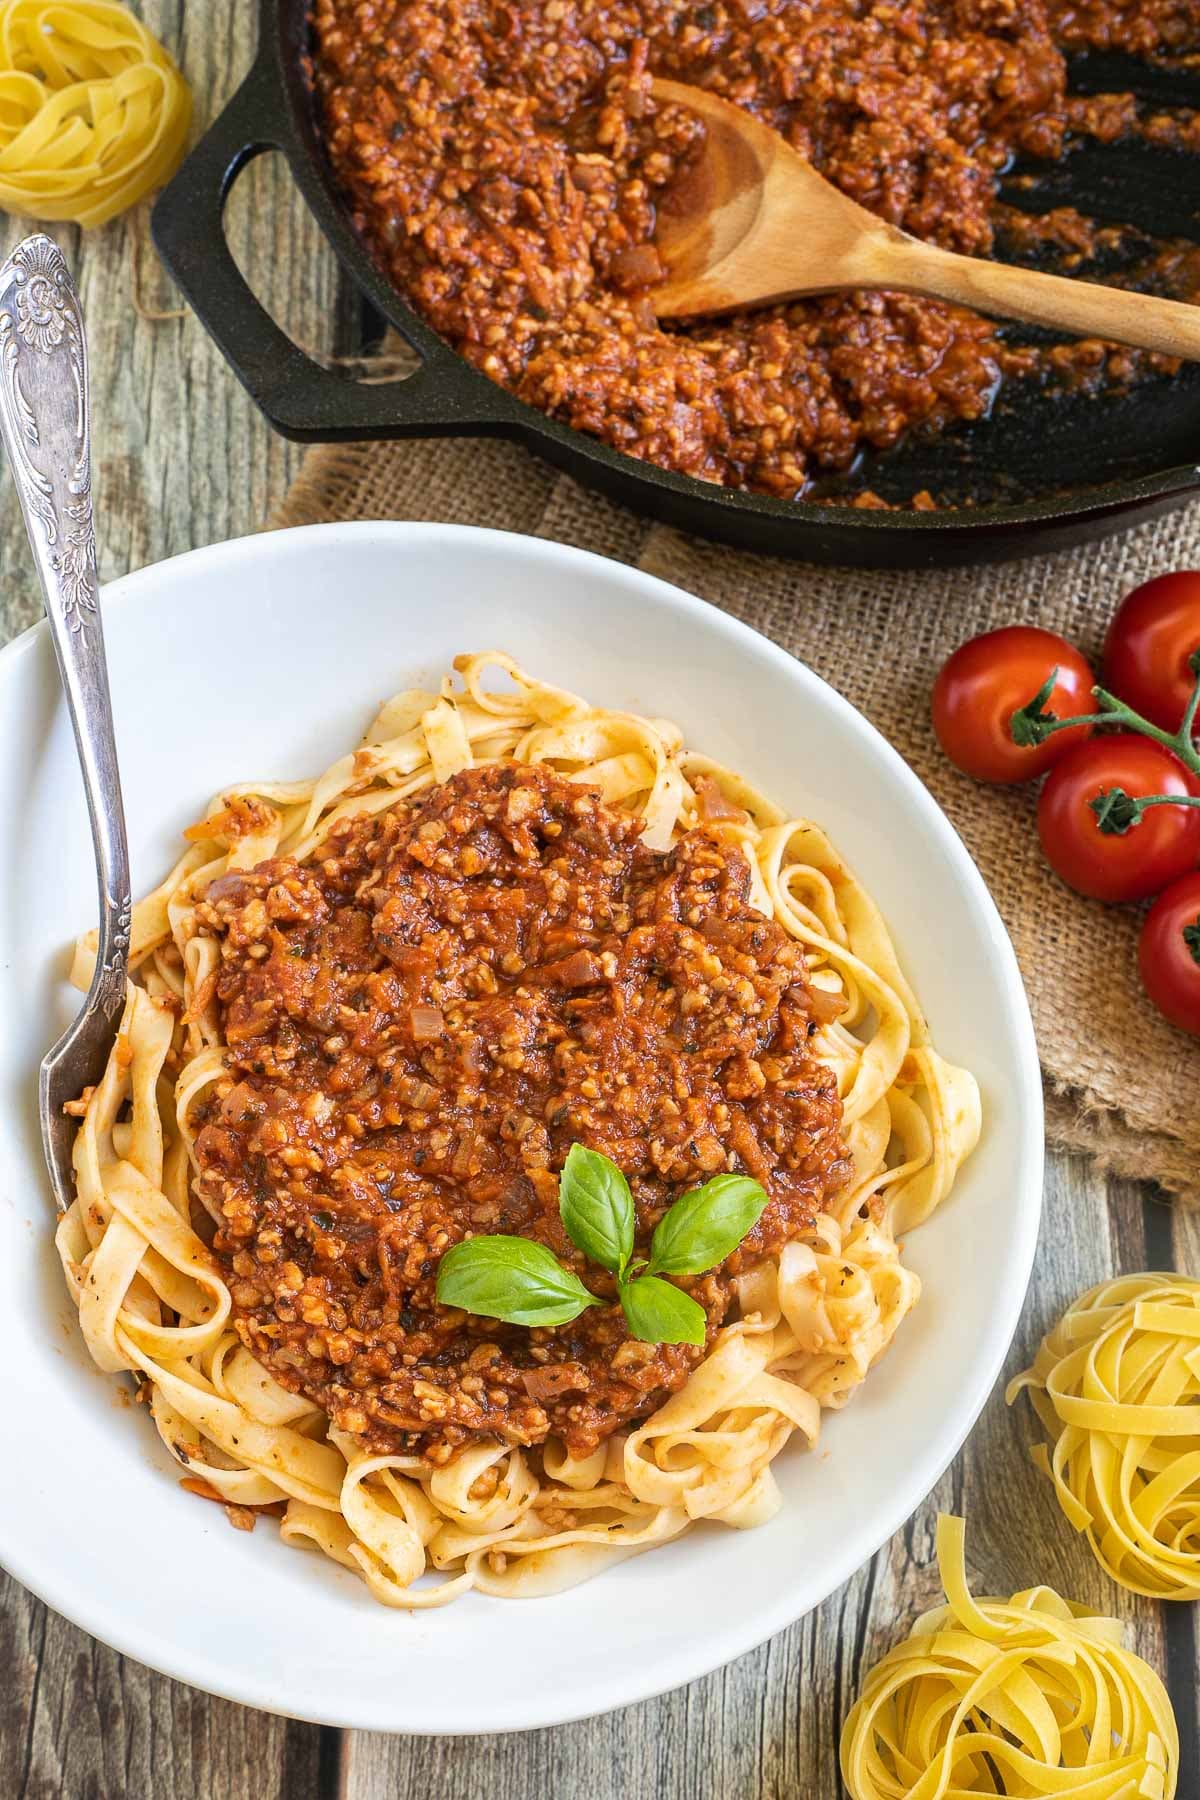 A white bowl of tagliatelle pasta topped with meat-like crumbles in bolognese sauce. Leftover bolognese in the cast iron skillet is right next to it.